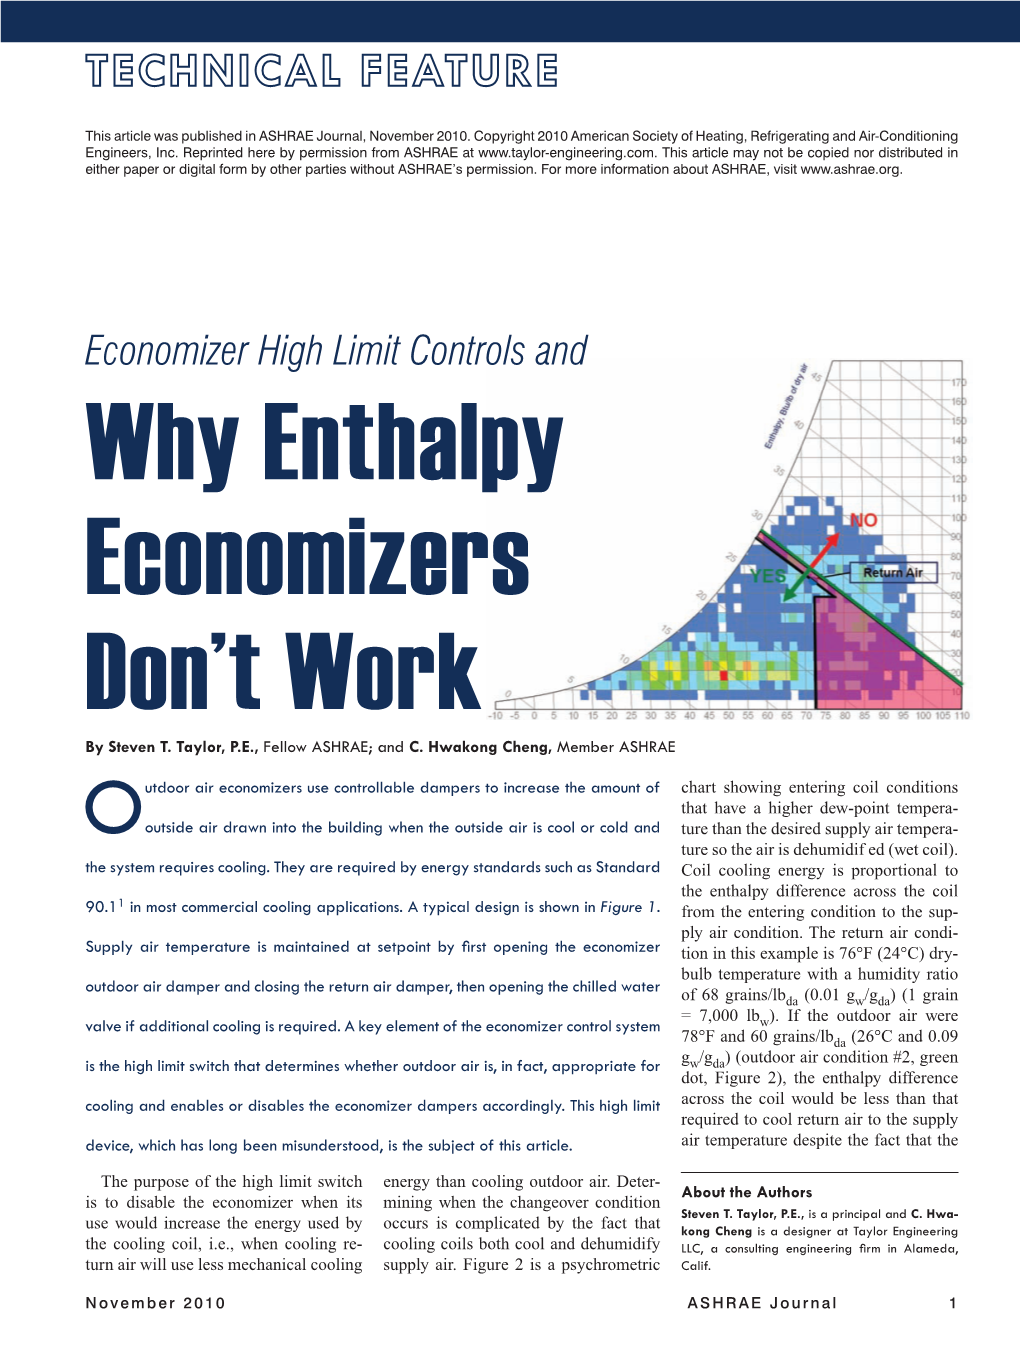 Why Enthalpy Economizers Don't Work